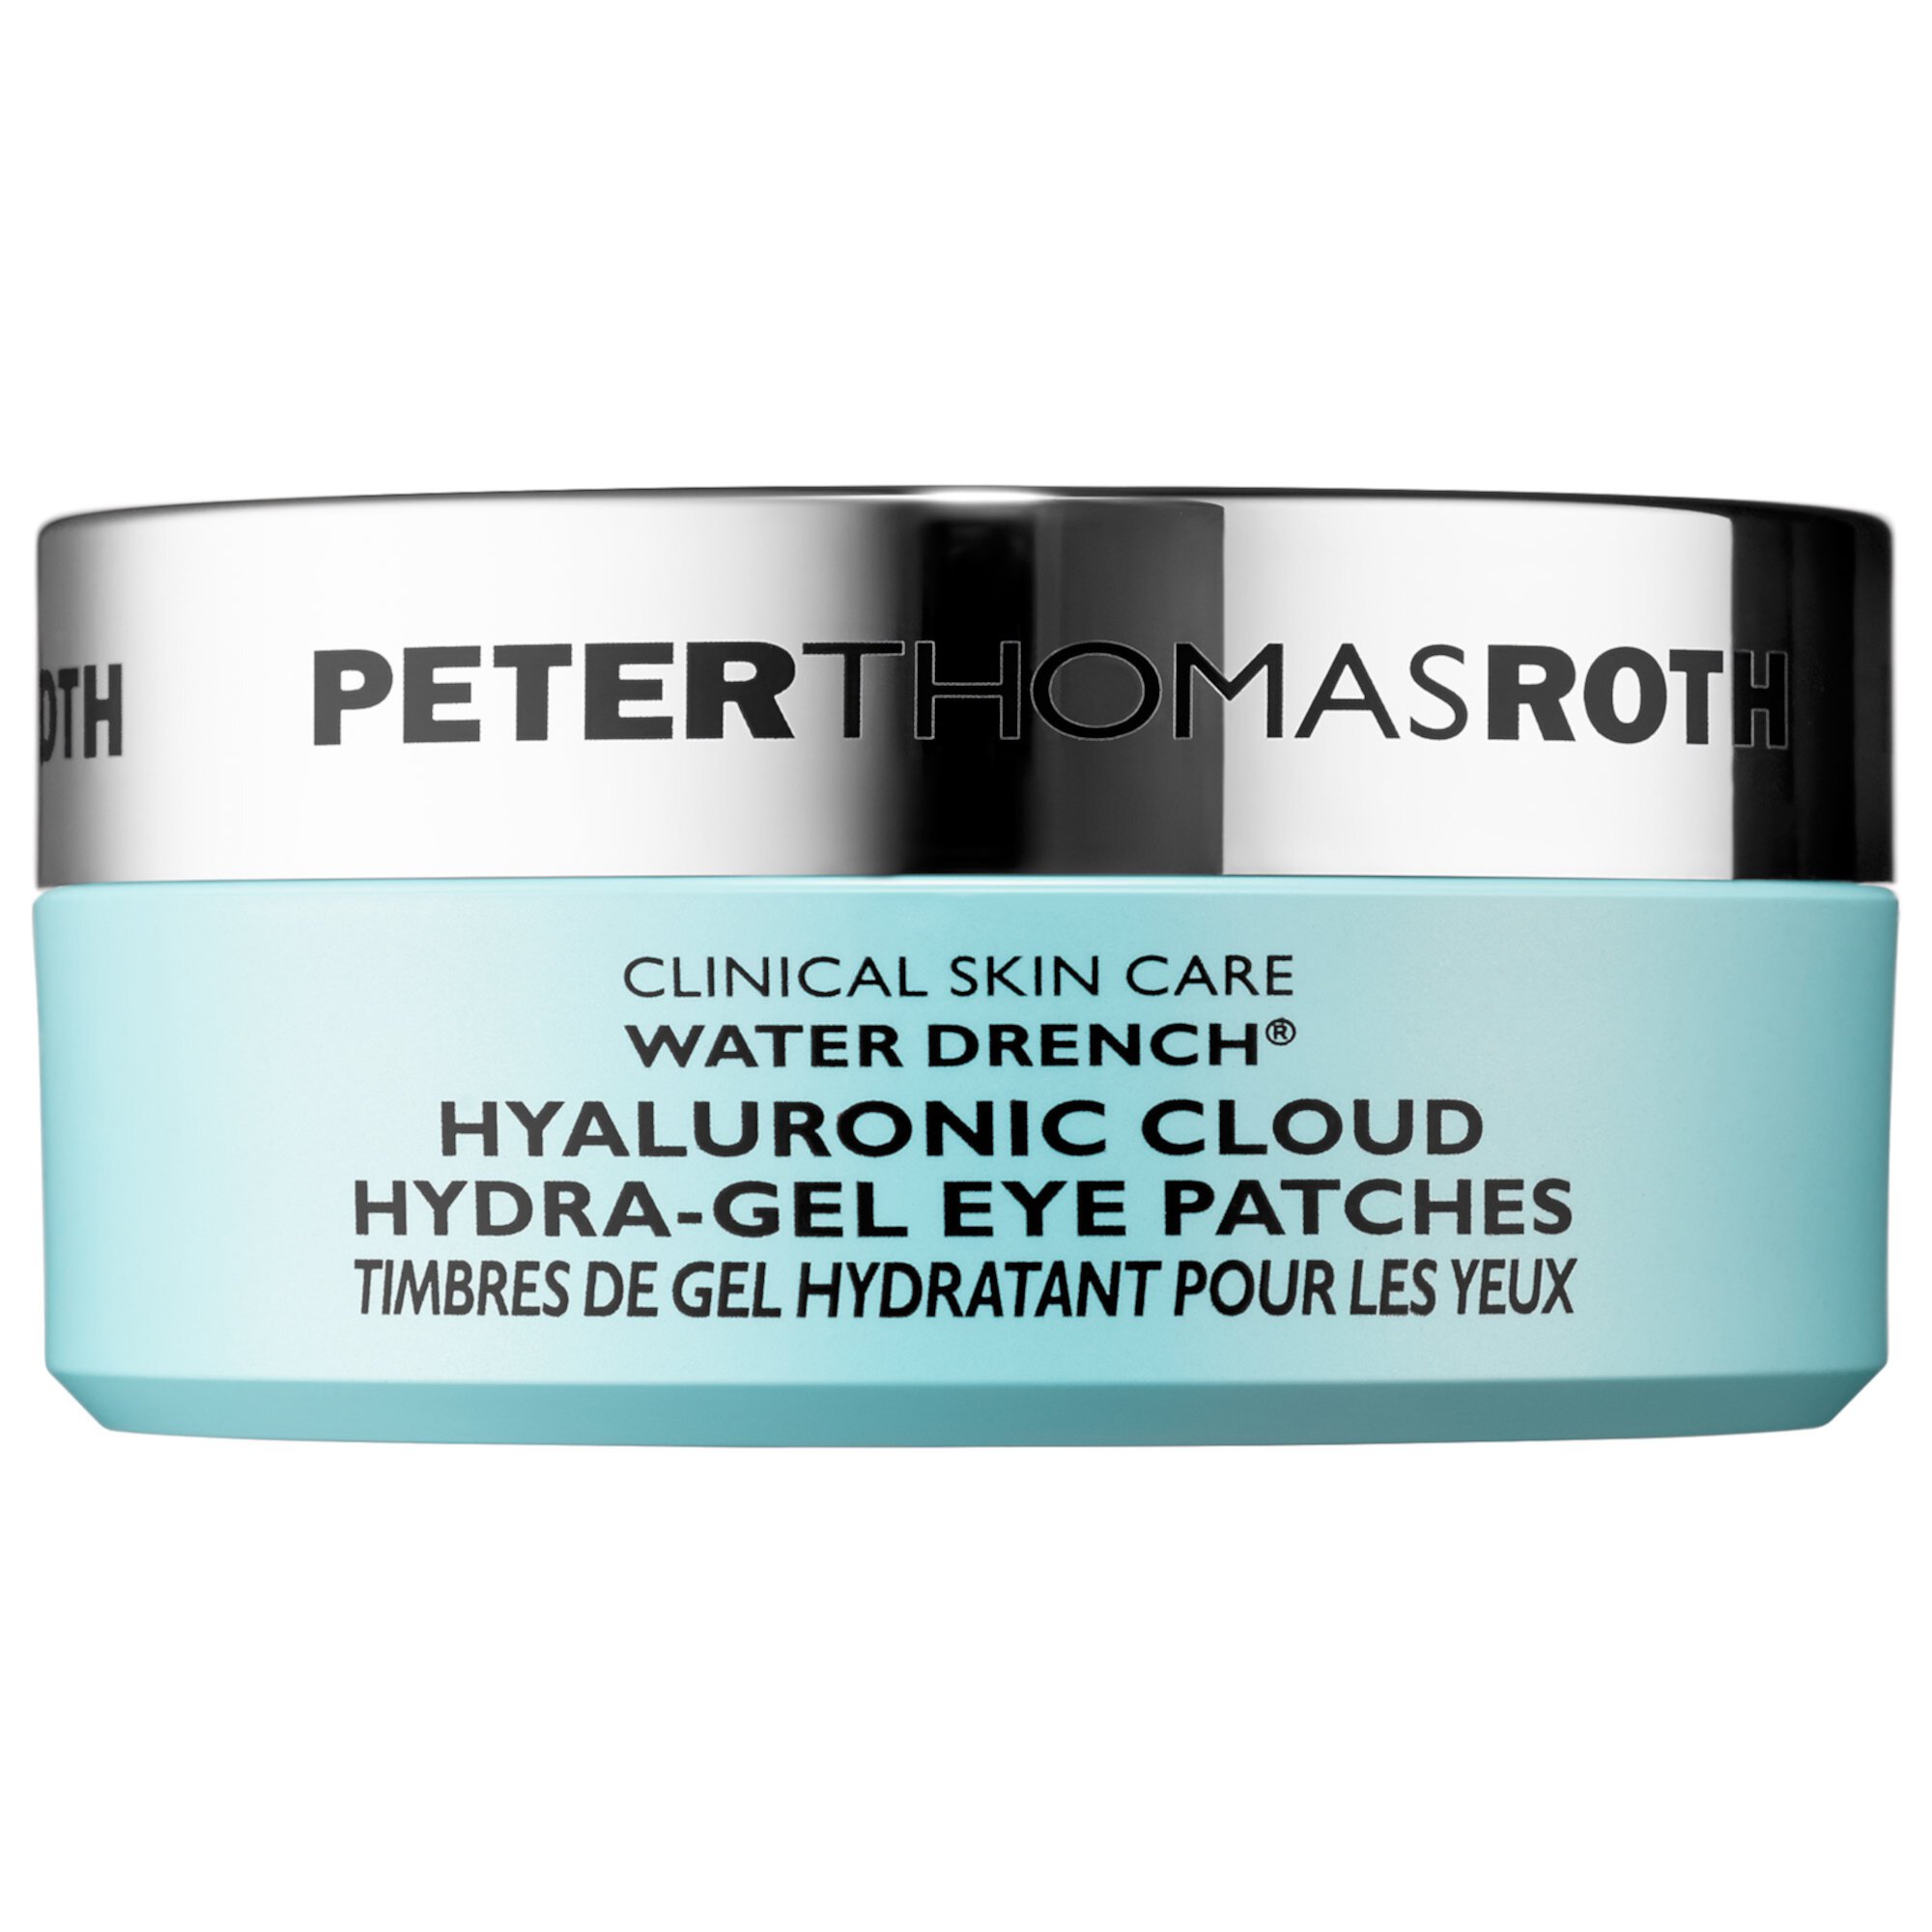 Water Drench Hyaluronic Cloud Hydra-Gel Патчи для глаз Peter Thomas Roth